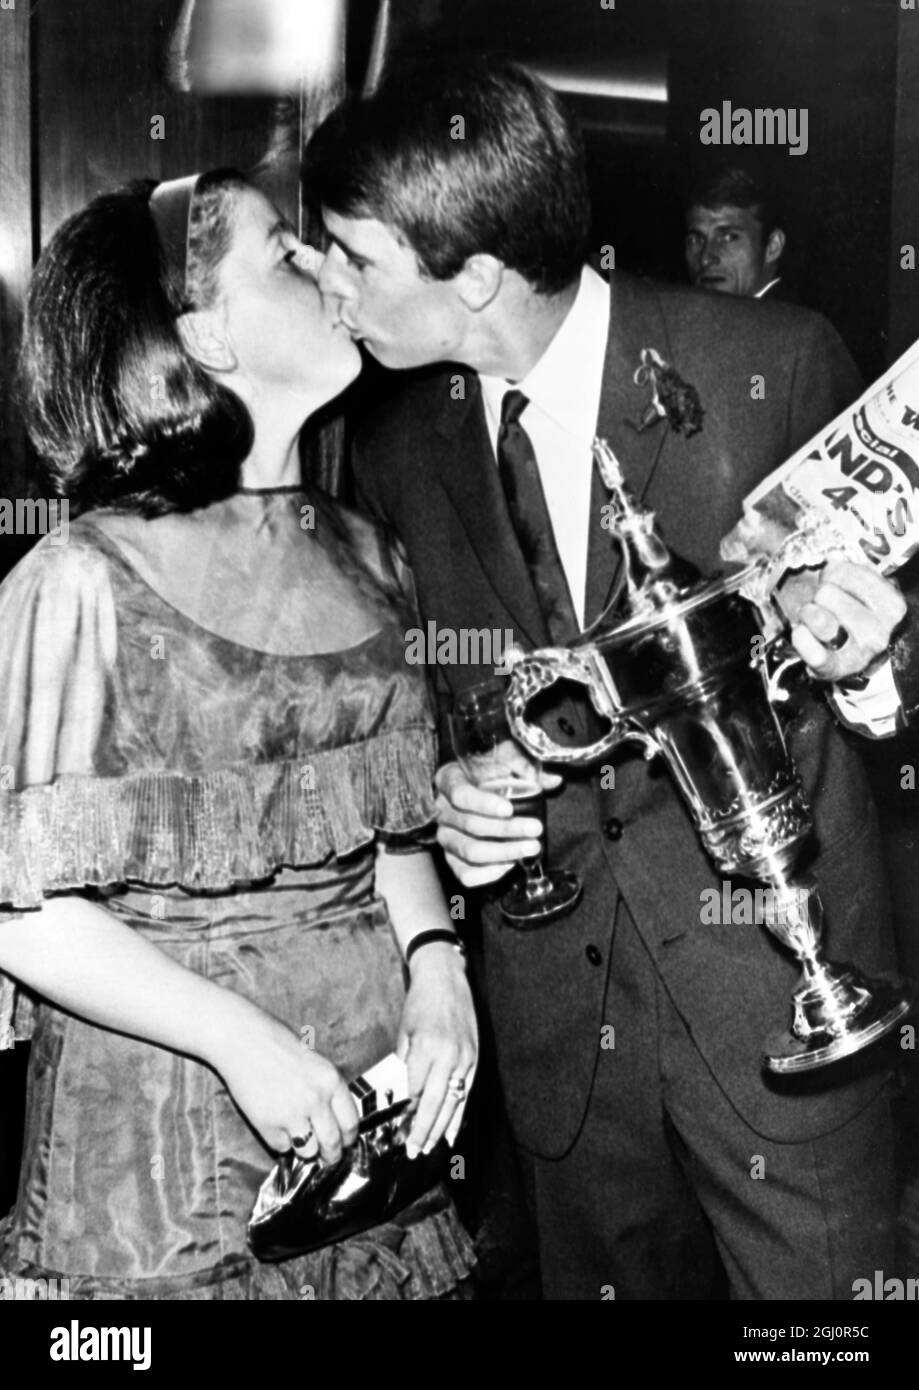 England's Hero. Geoff HurstHolding the trophy presented to him by a National Newspaper as the Best Player in yesterday's World Cup Final at Wembley Stadium, England's Geoff Hurst, who scored three of his county's four goals against West Germany, kisses his wife during last night's reception given for the victorious England team by the Government at a Kensington Hotel. England defeated West Germany by four goals to two after extra time to win the covested world trophy. 31 July 1966 Stock Photo